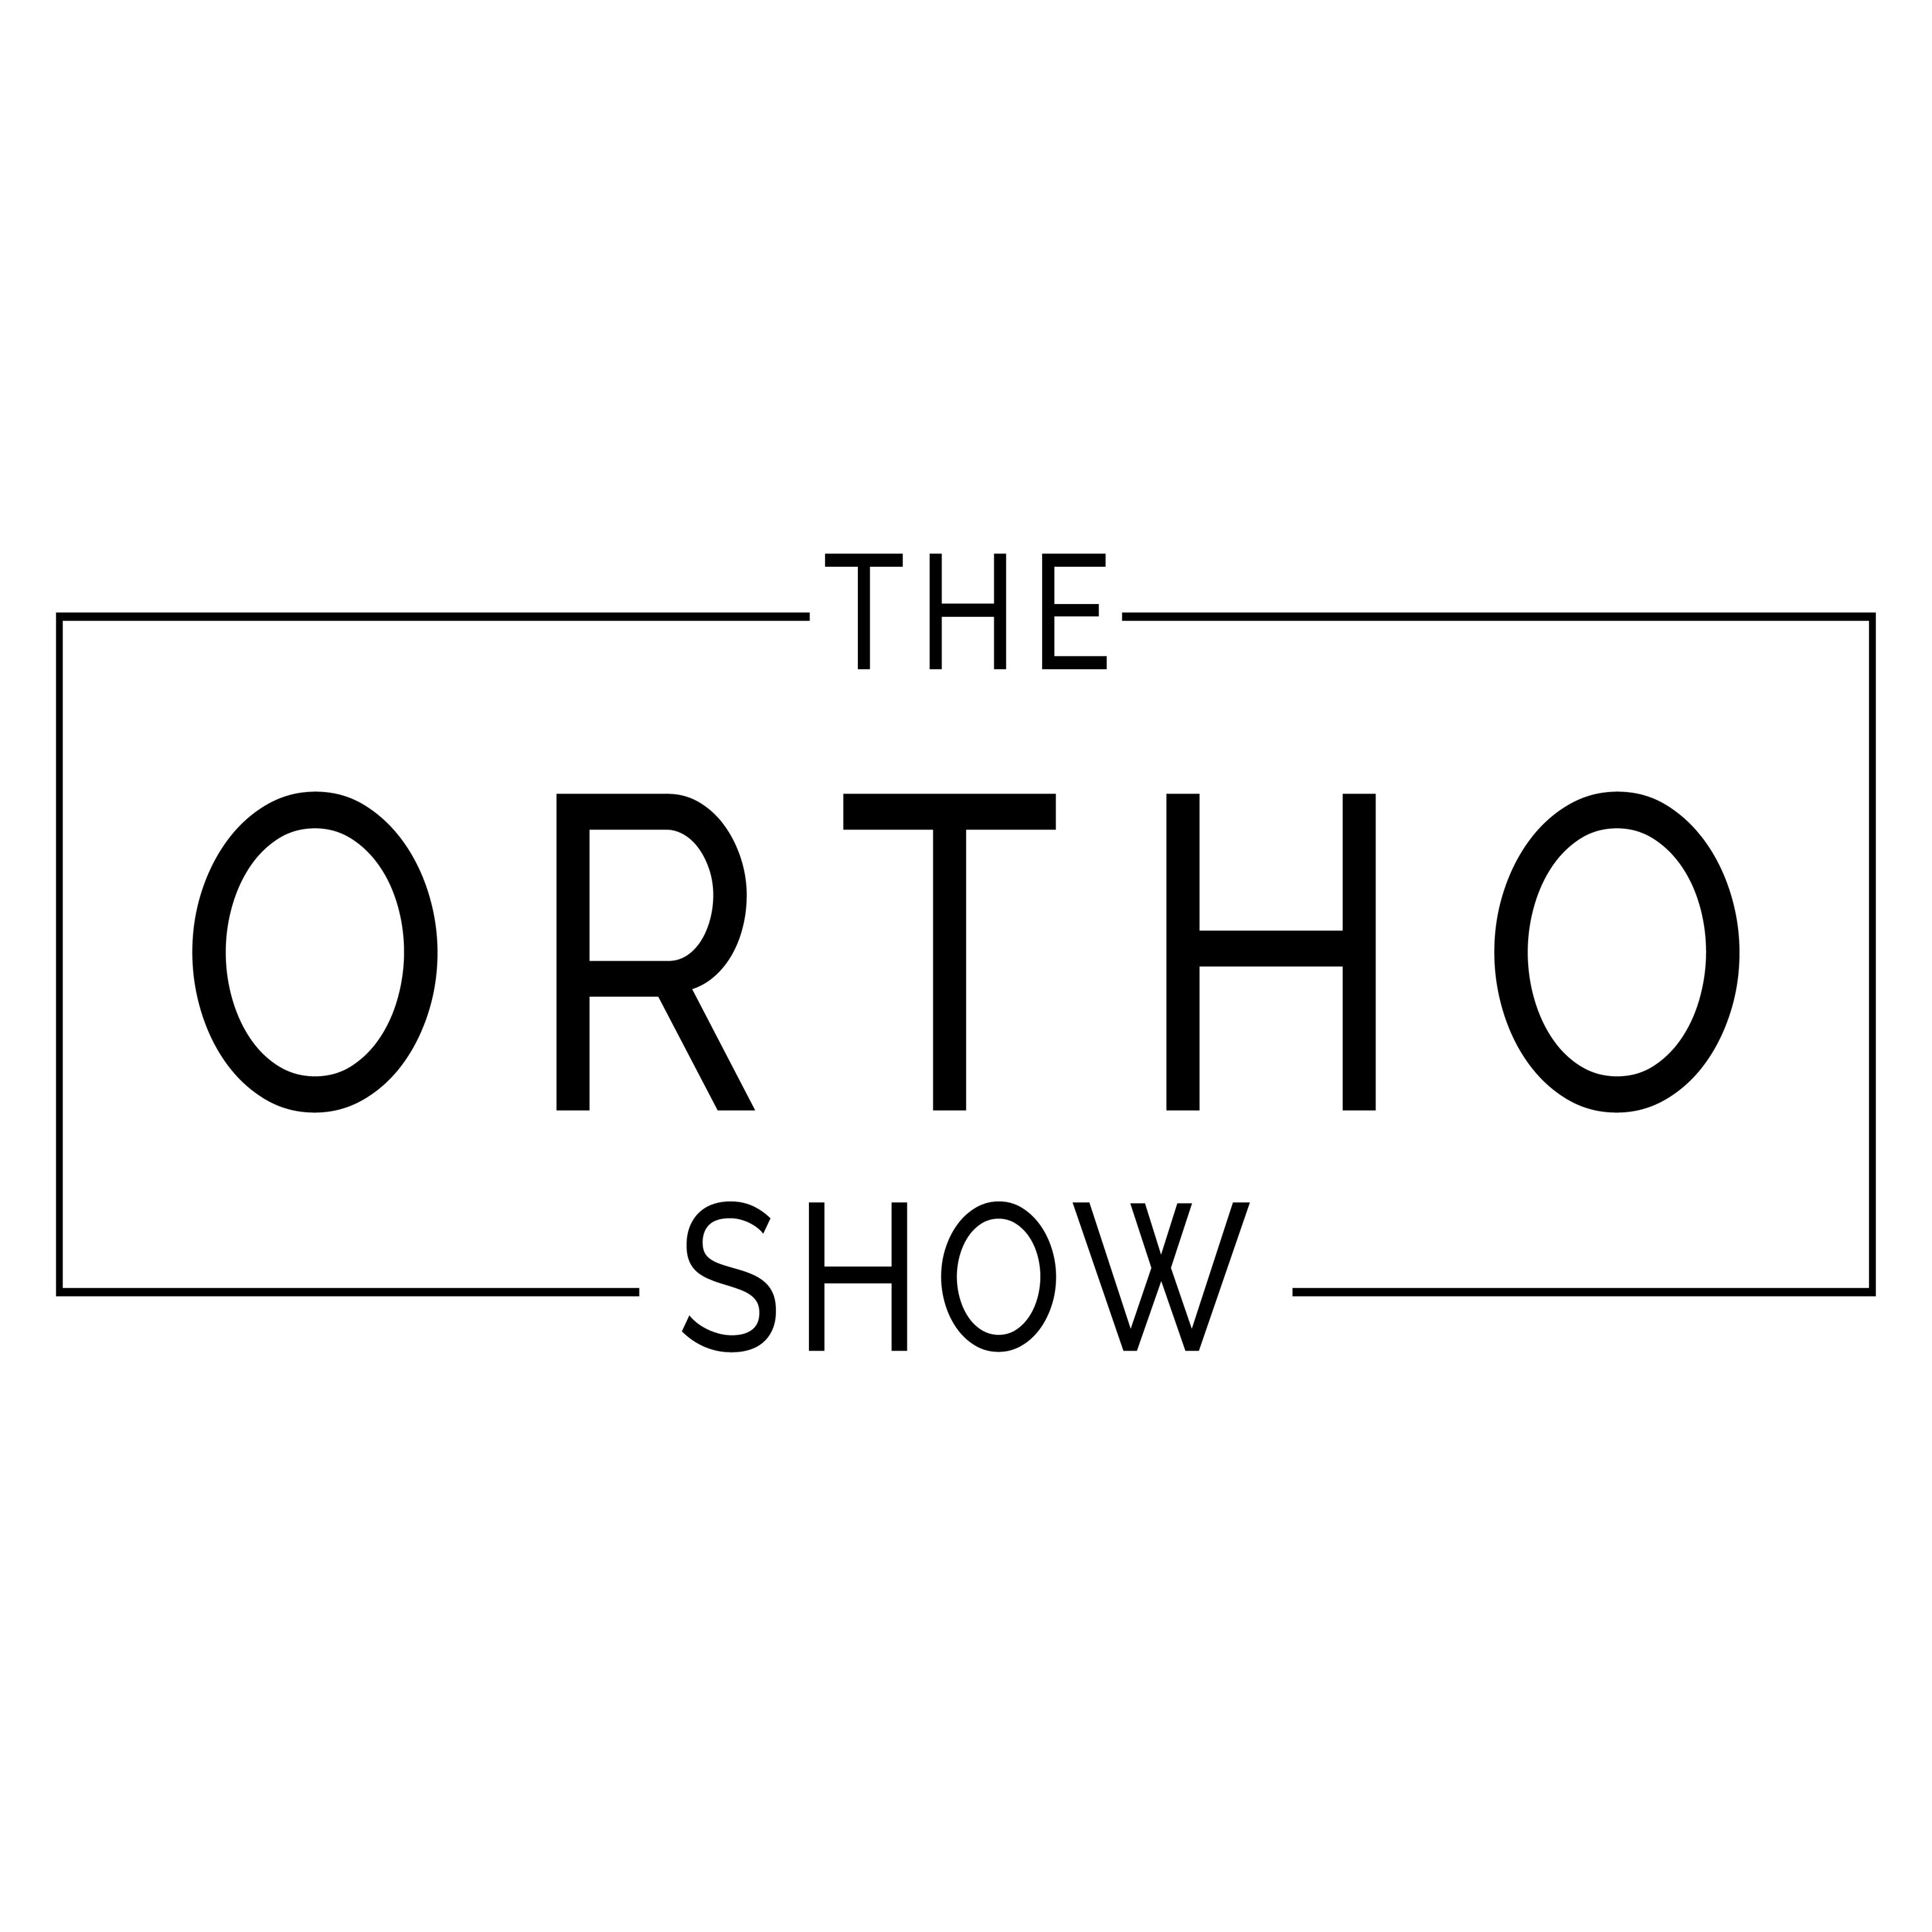 The Ortho Show